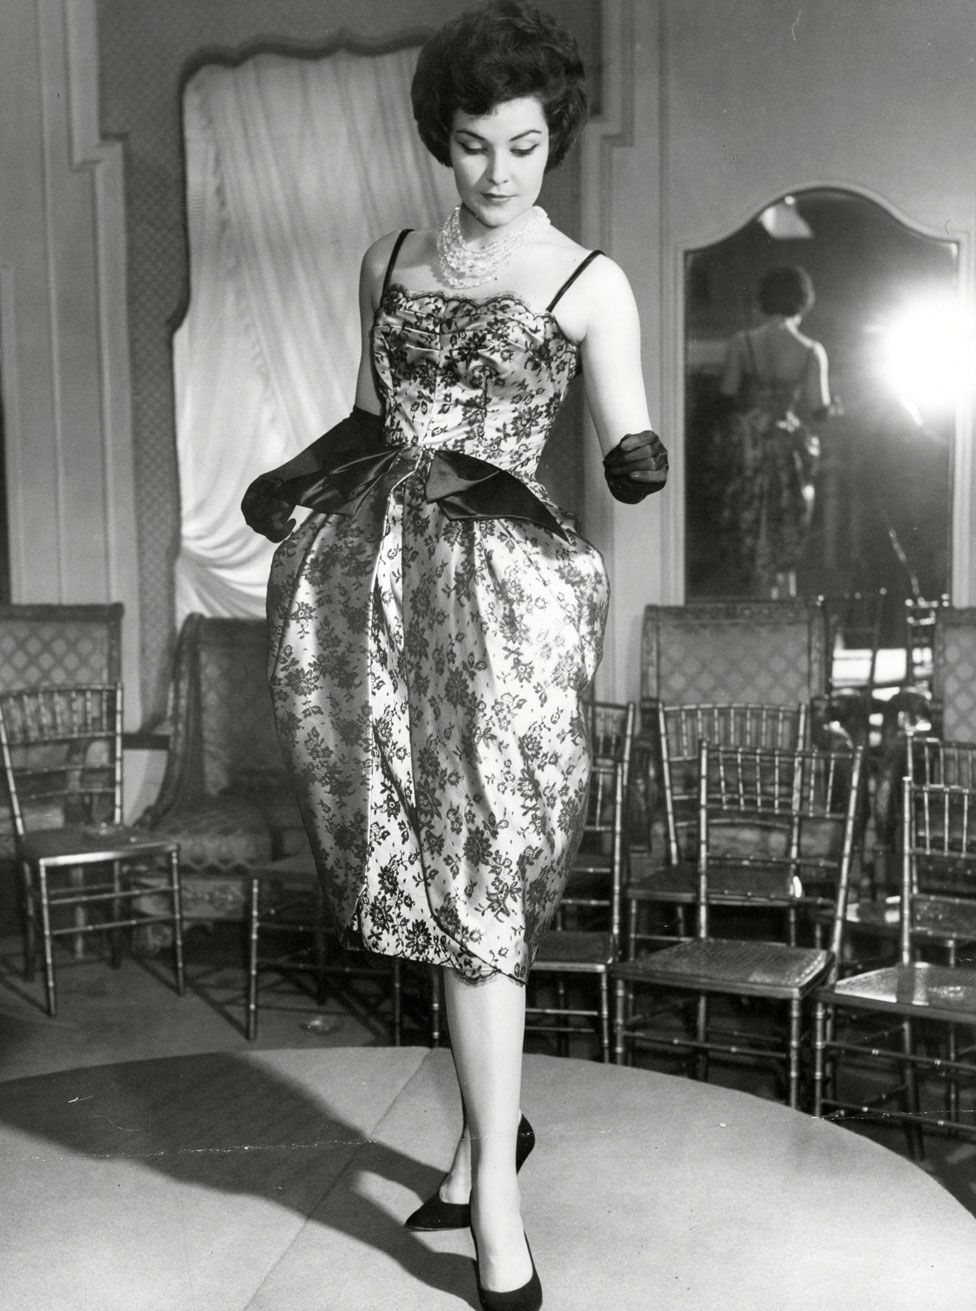 A model stands on a stage wearing a satin dress